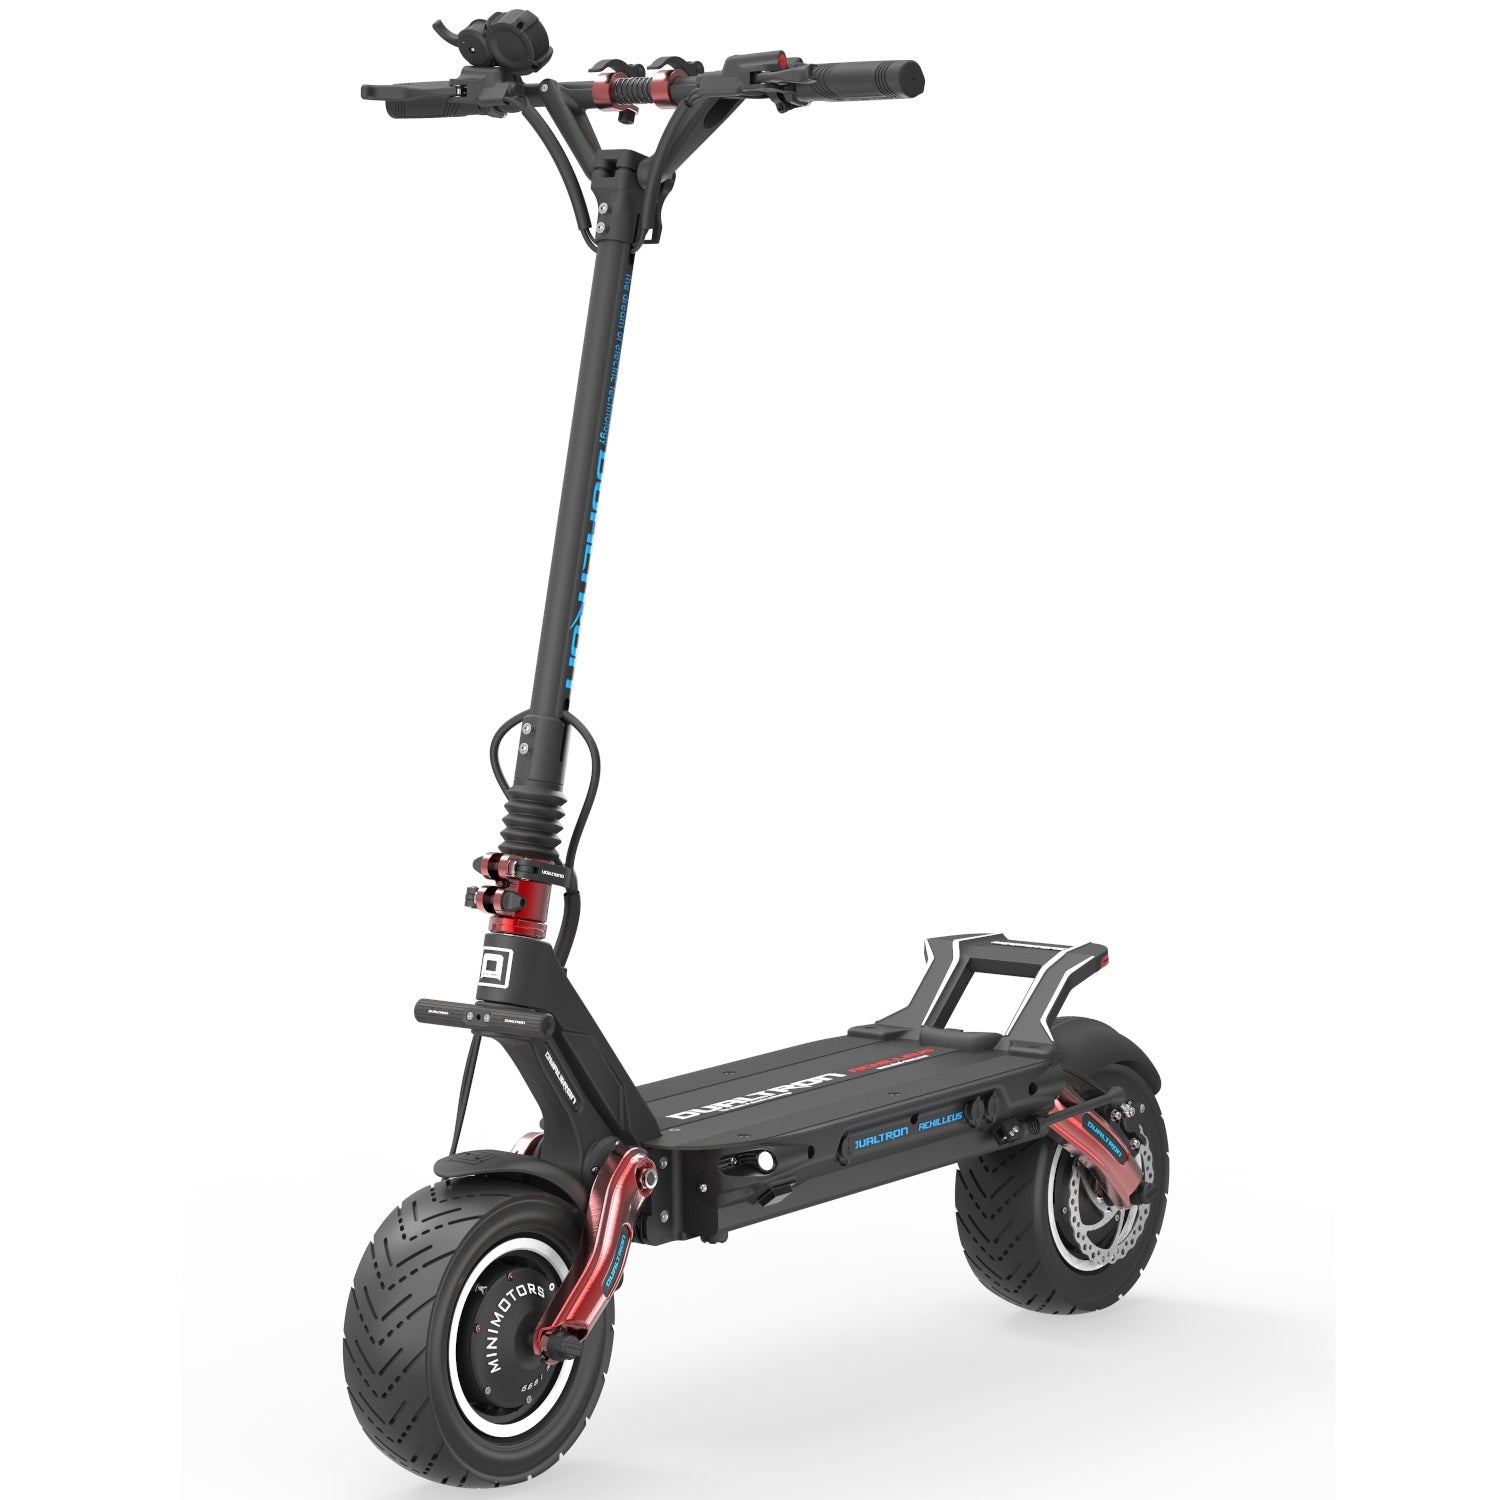 Dualtron Achilleus Electric Scooter 35Ah LG - LOCO Scooters